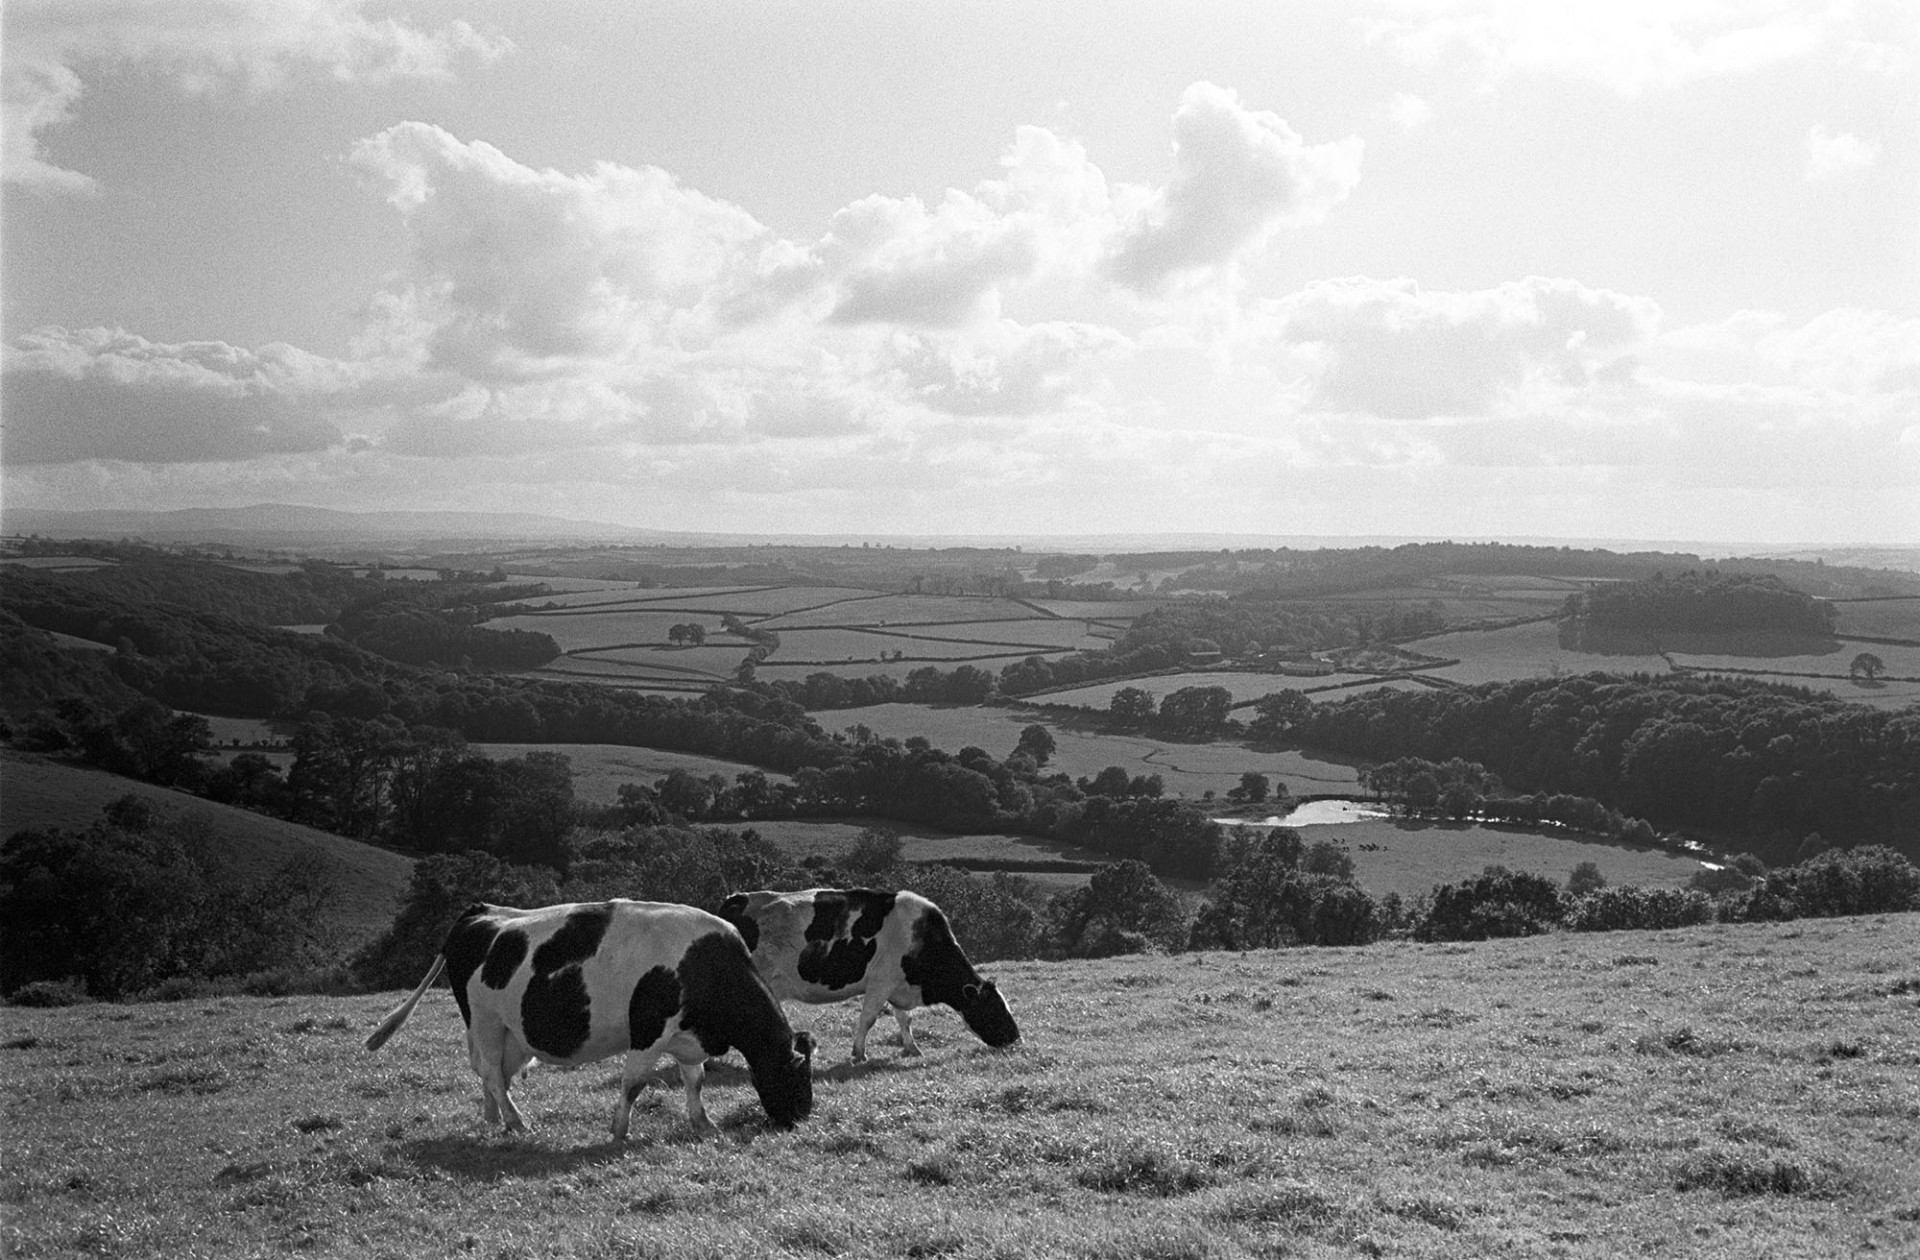 Cows with distant view with river. 
[Two cows grazing in a field in Harepath, Beaford with a view of the River Torridge, woodland, fields and clouds in the background.]